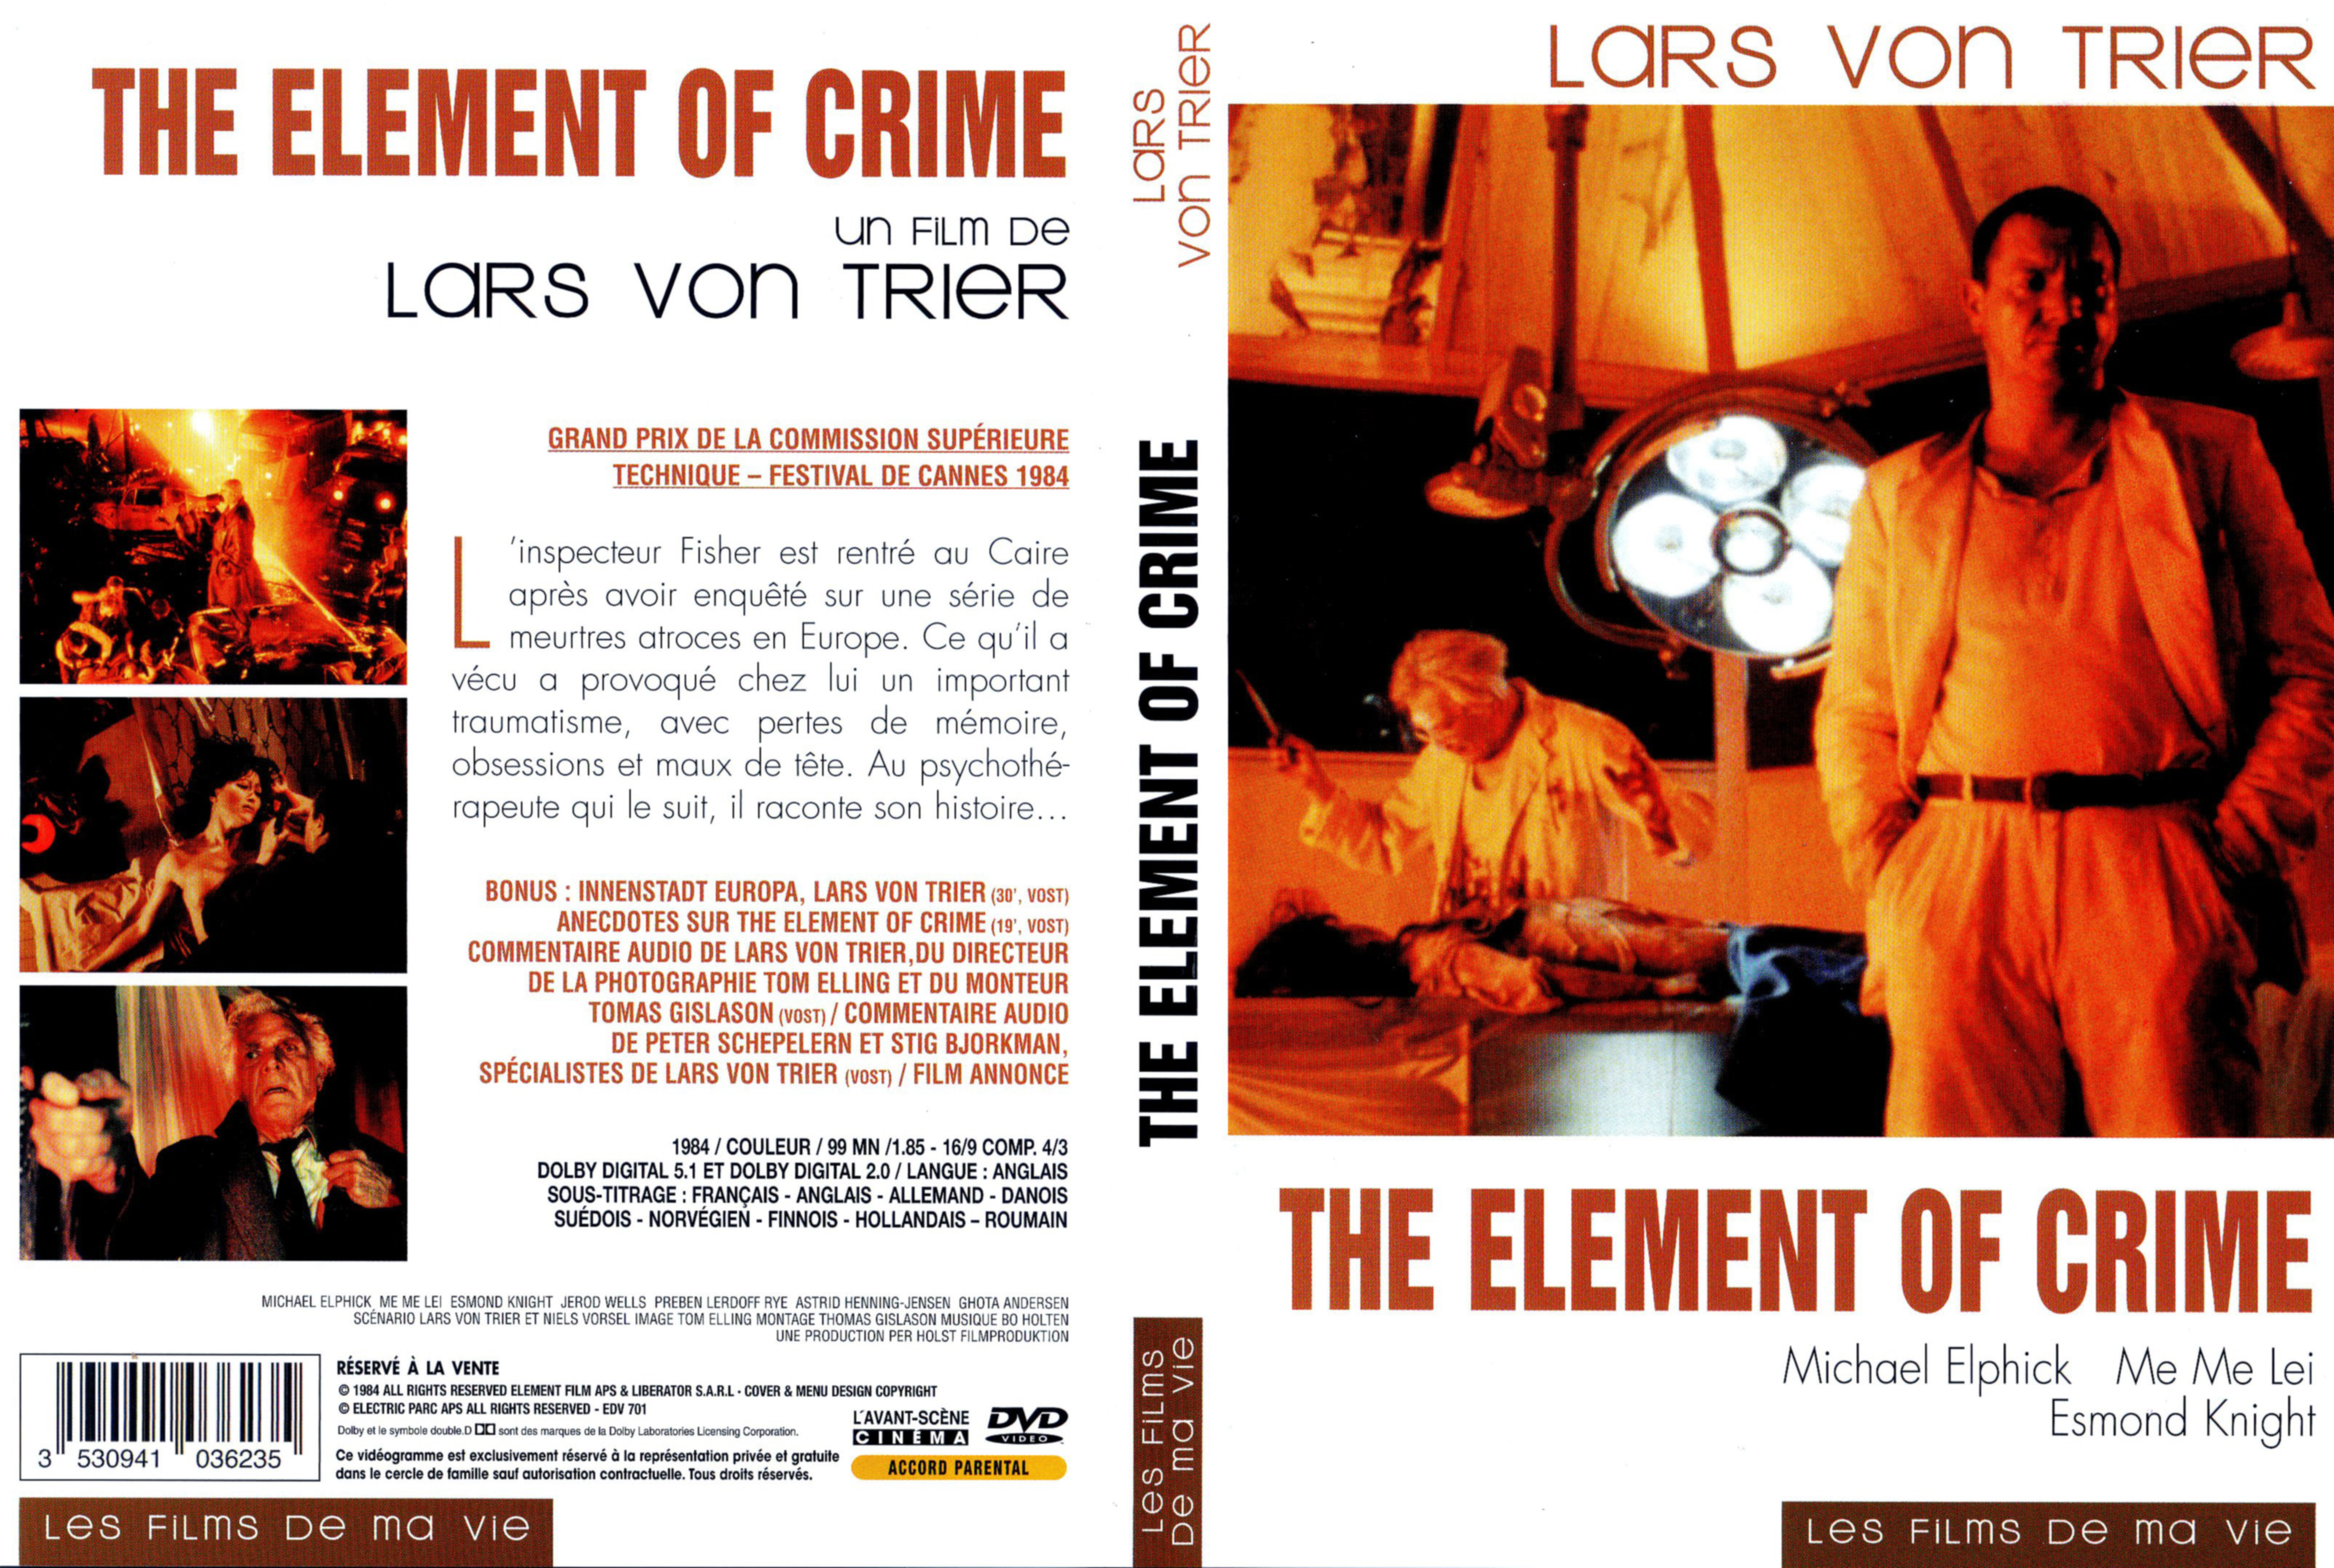 Jaquette DVD The Element of crime